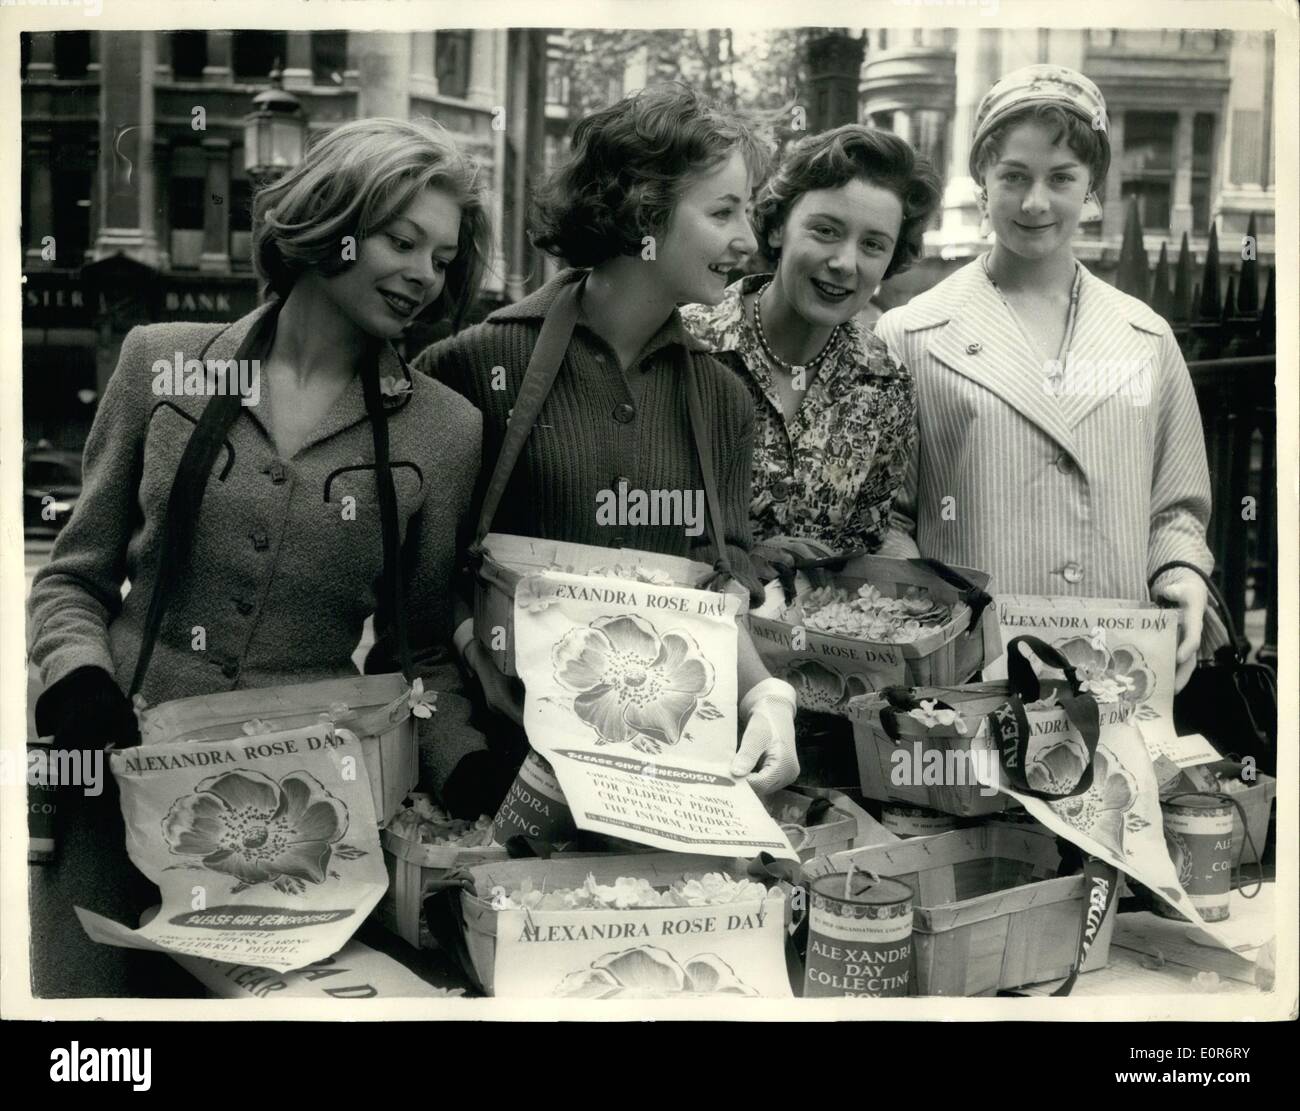 Jun. 06, 1958 - Showgirls sell Alexandra Roses in London. Girls from a number of London shows were to be seen at St. Paul's Cathedral this morning selling Alexandra Roses. Keystone Photo Shows: Four young ladies seen as they collect their consignments of Alexandra Day Roses at the St. Paul's depot this morning. They are L-R: Willow Stockdale and Pamela Morgan both of ''My Fair Lady'' - Marion Grimaldi (''Where's Charley'') and Vanessa Redgrave (''A touch of the sun' Stock Photo